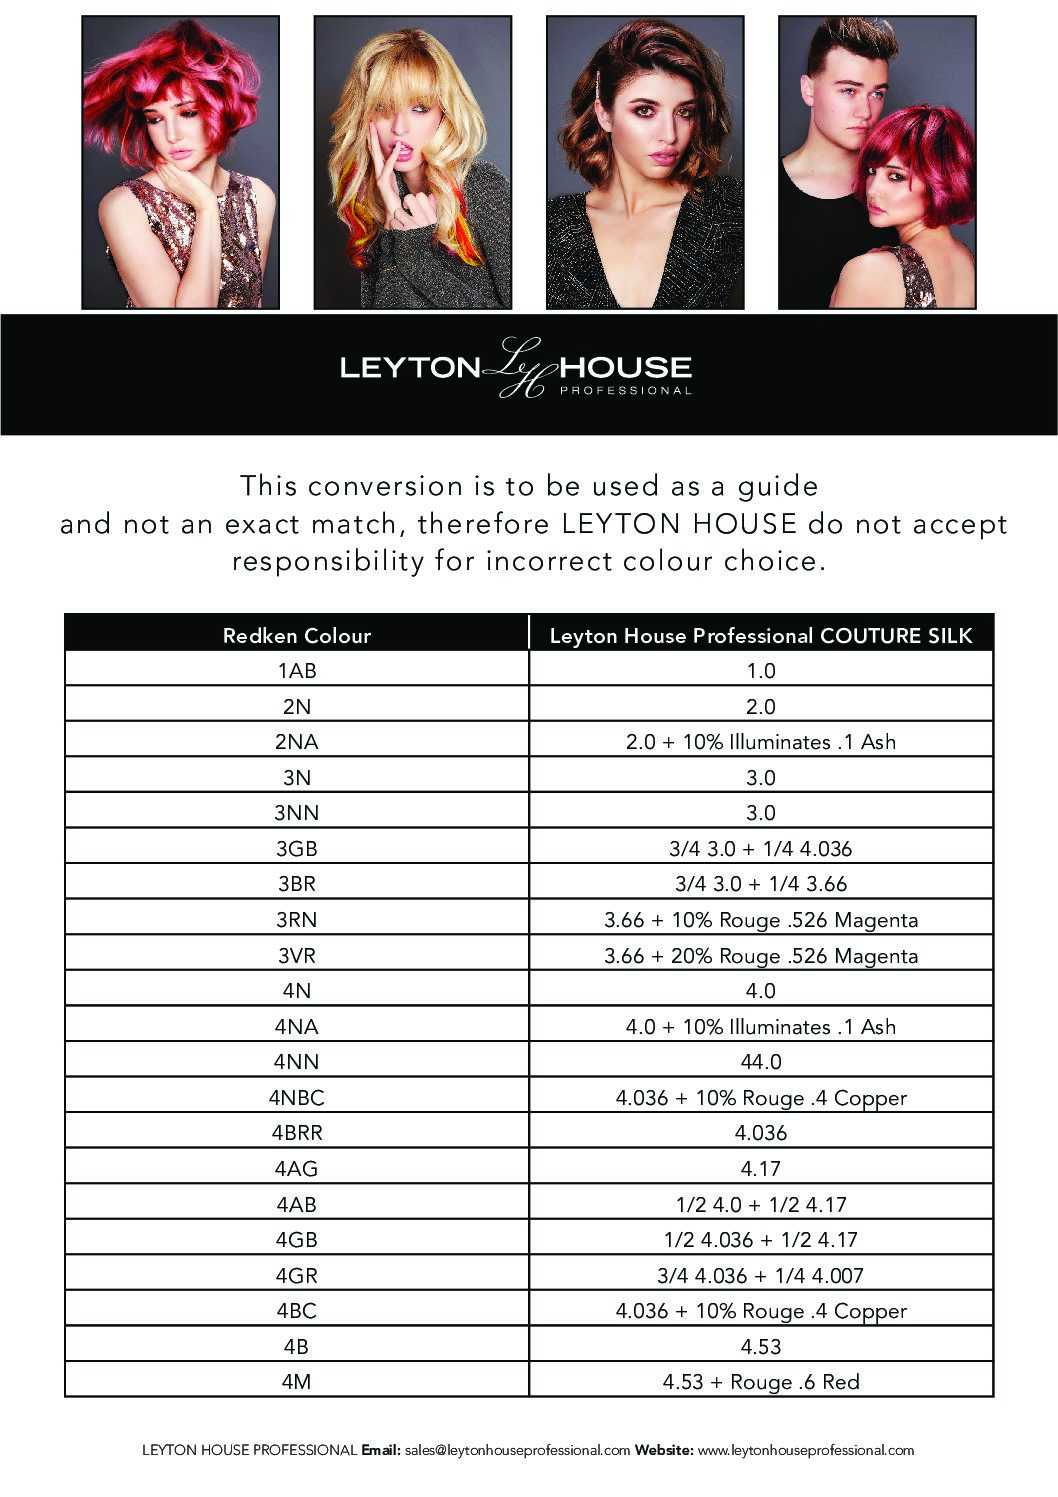 Goldwell Conversion Chart - The Online